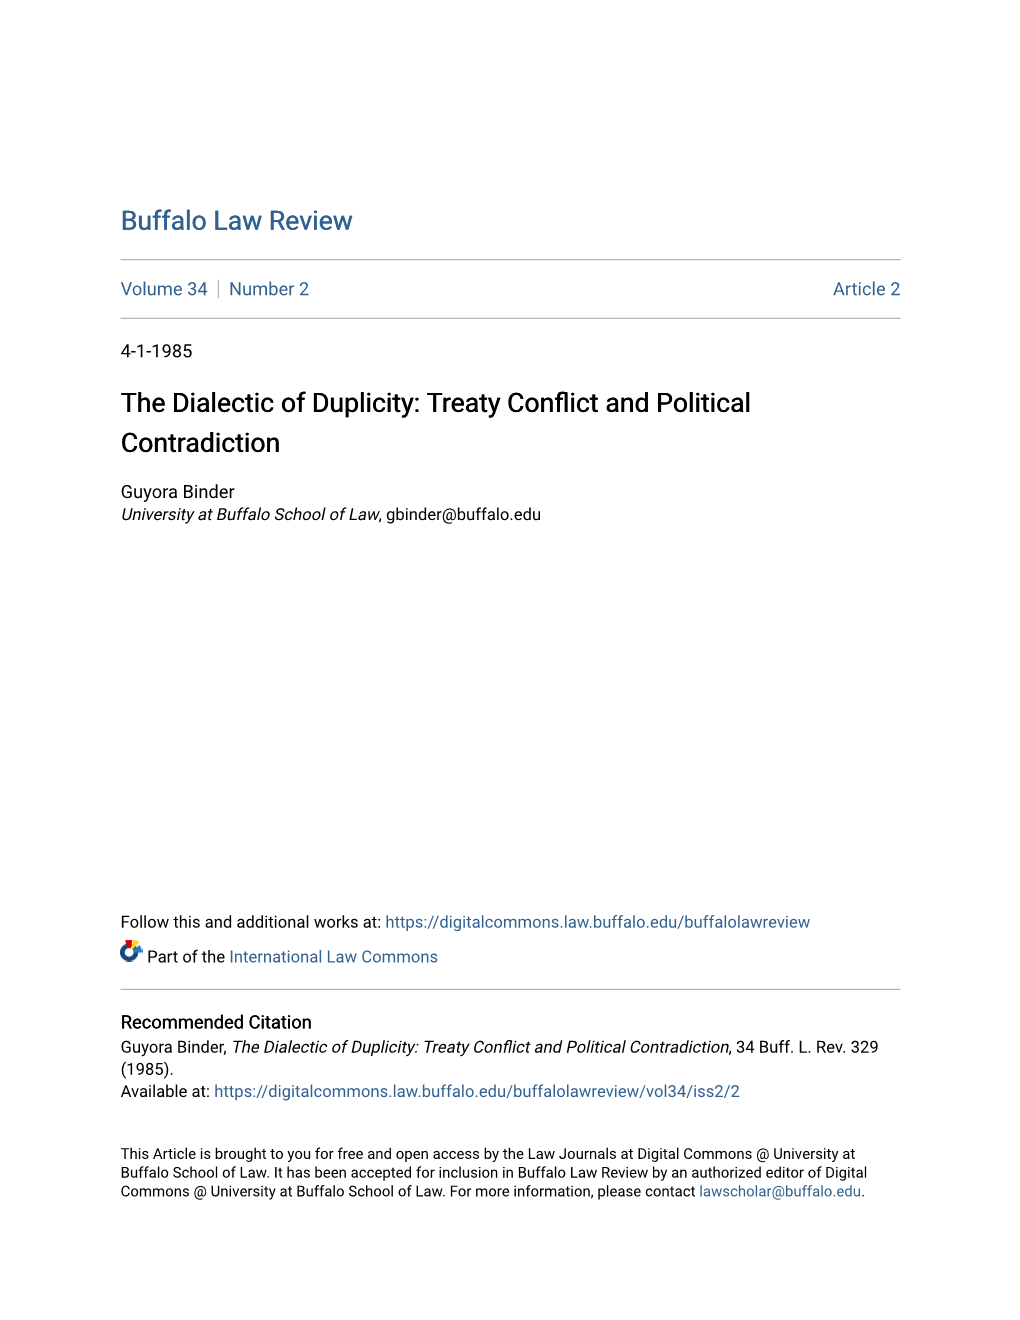 The Dialectic of Duplicity: Treaty Conflict and Political Contradictiont